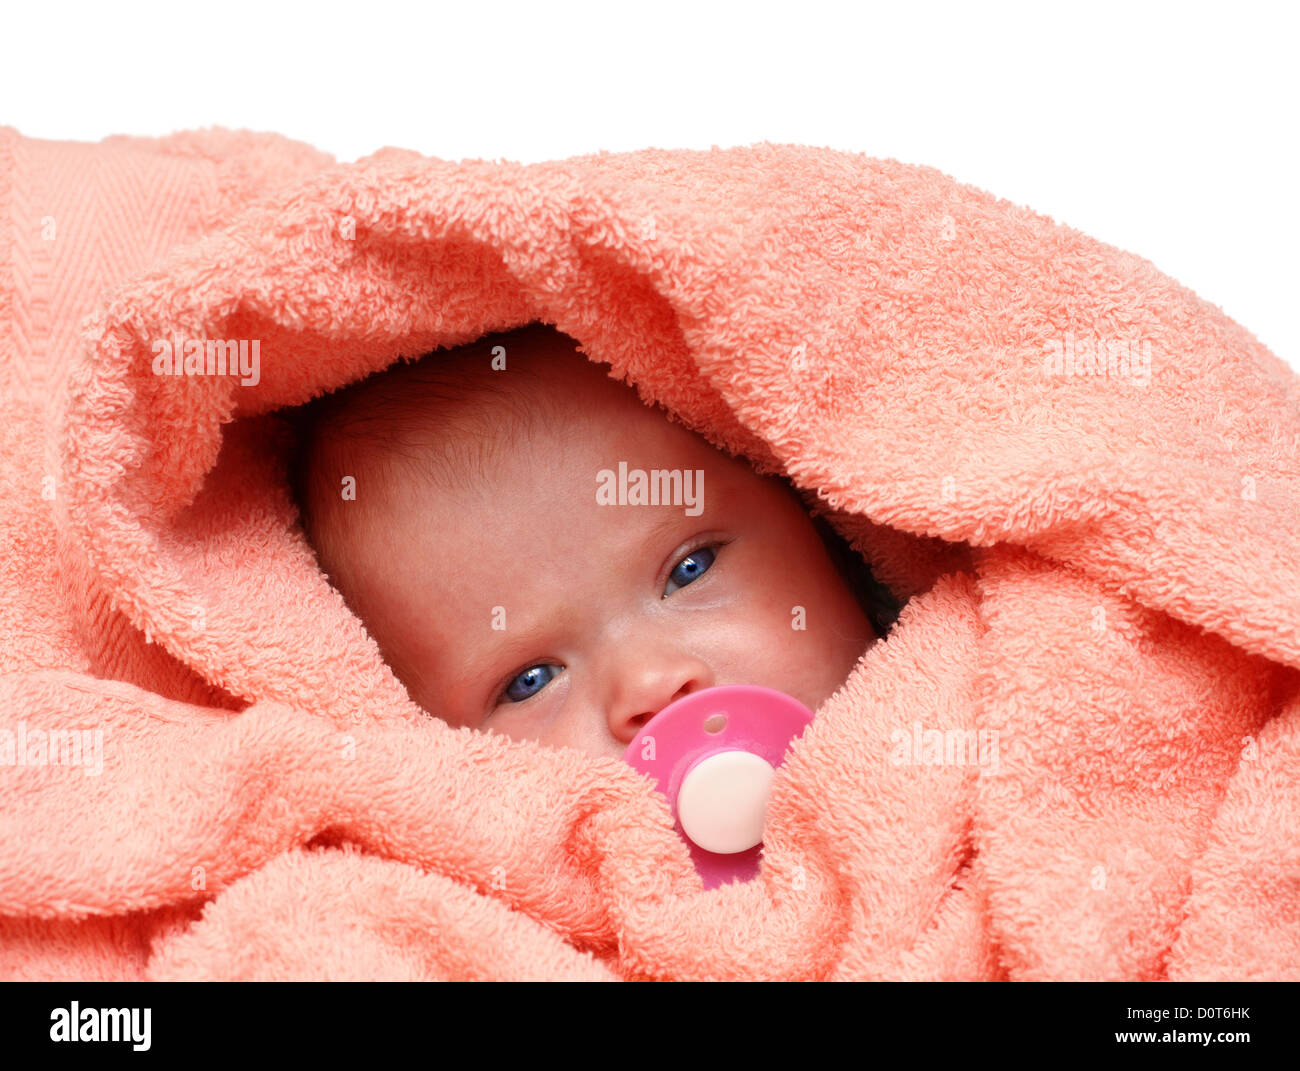 newborn baby with soother Stock Photo